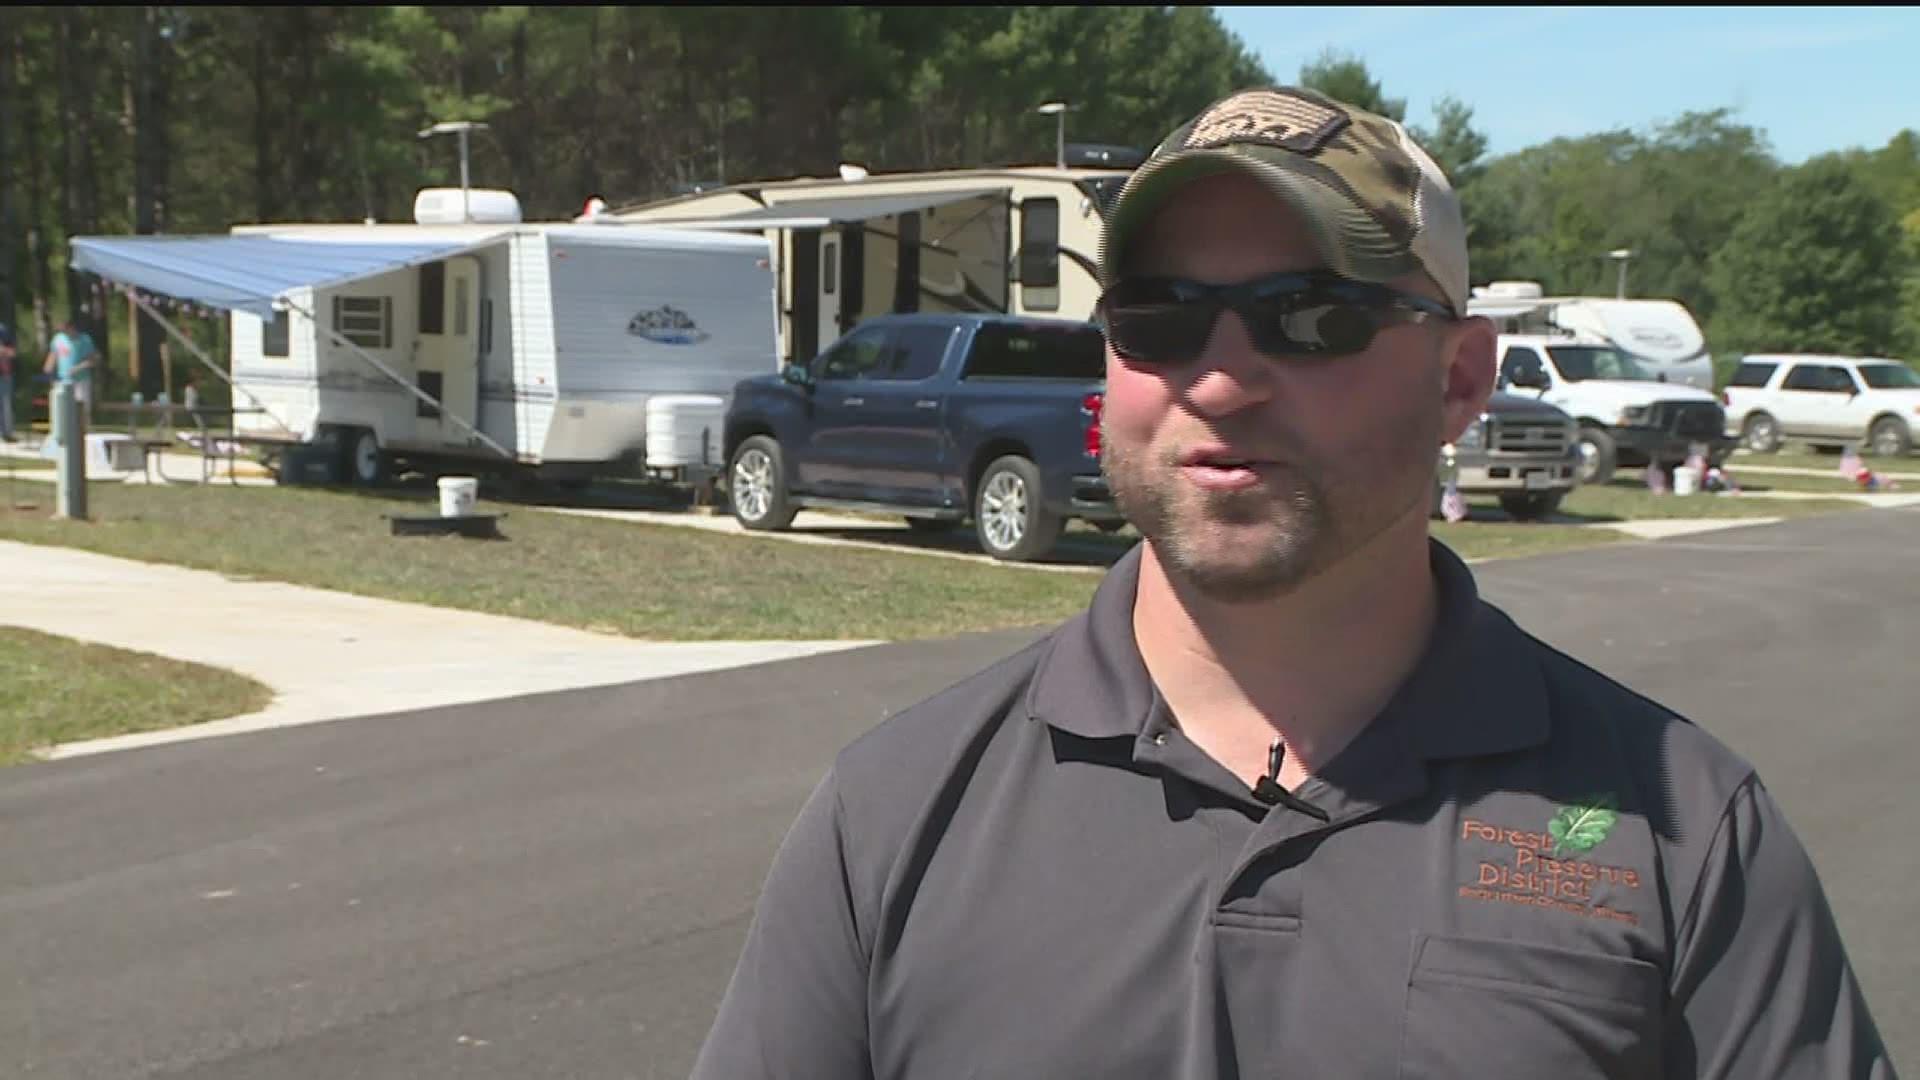 RV sales are up and the Loud Thunder forest preserve has a new campground open.